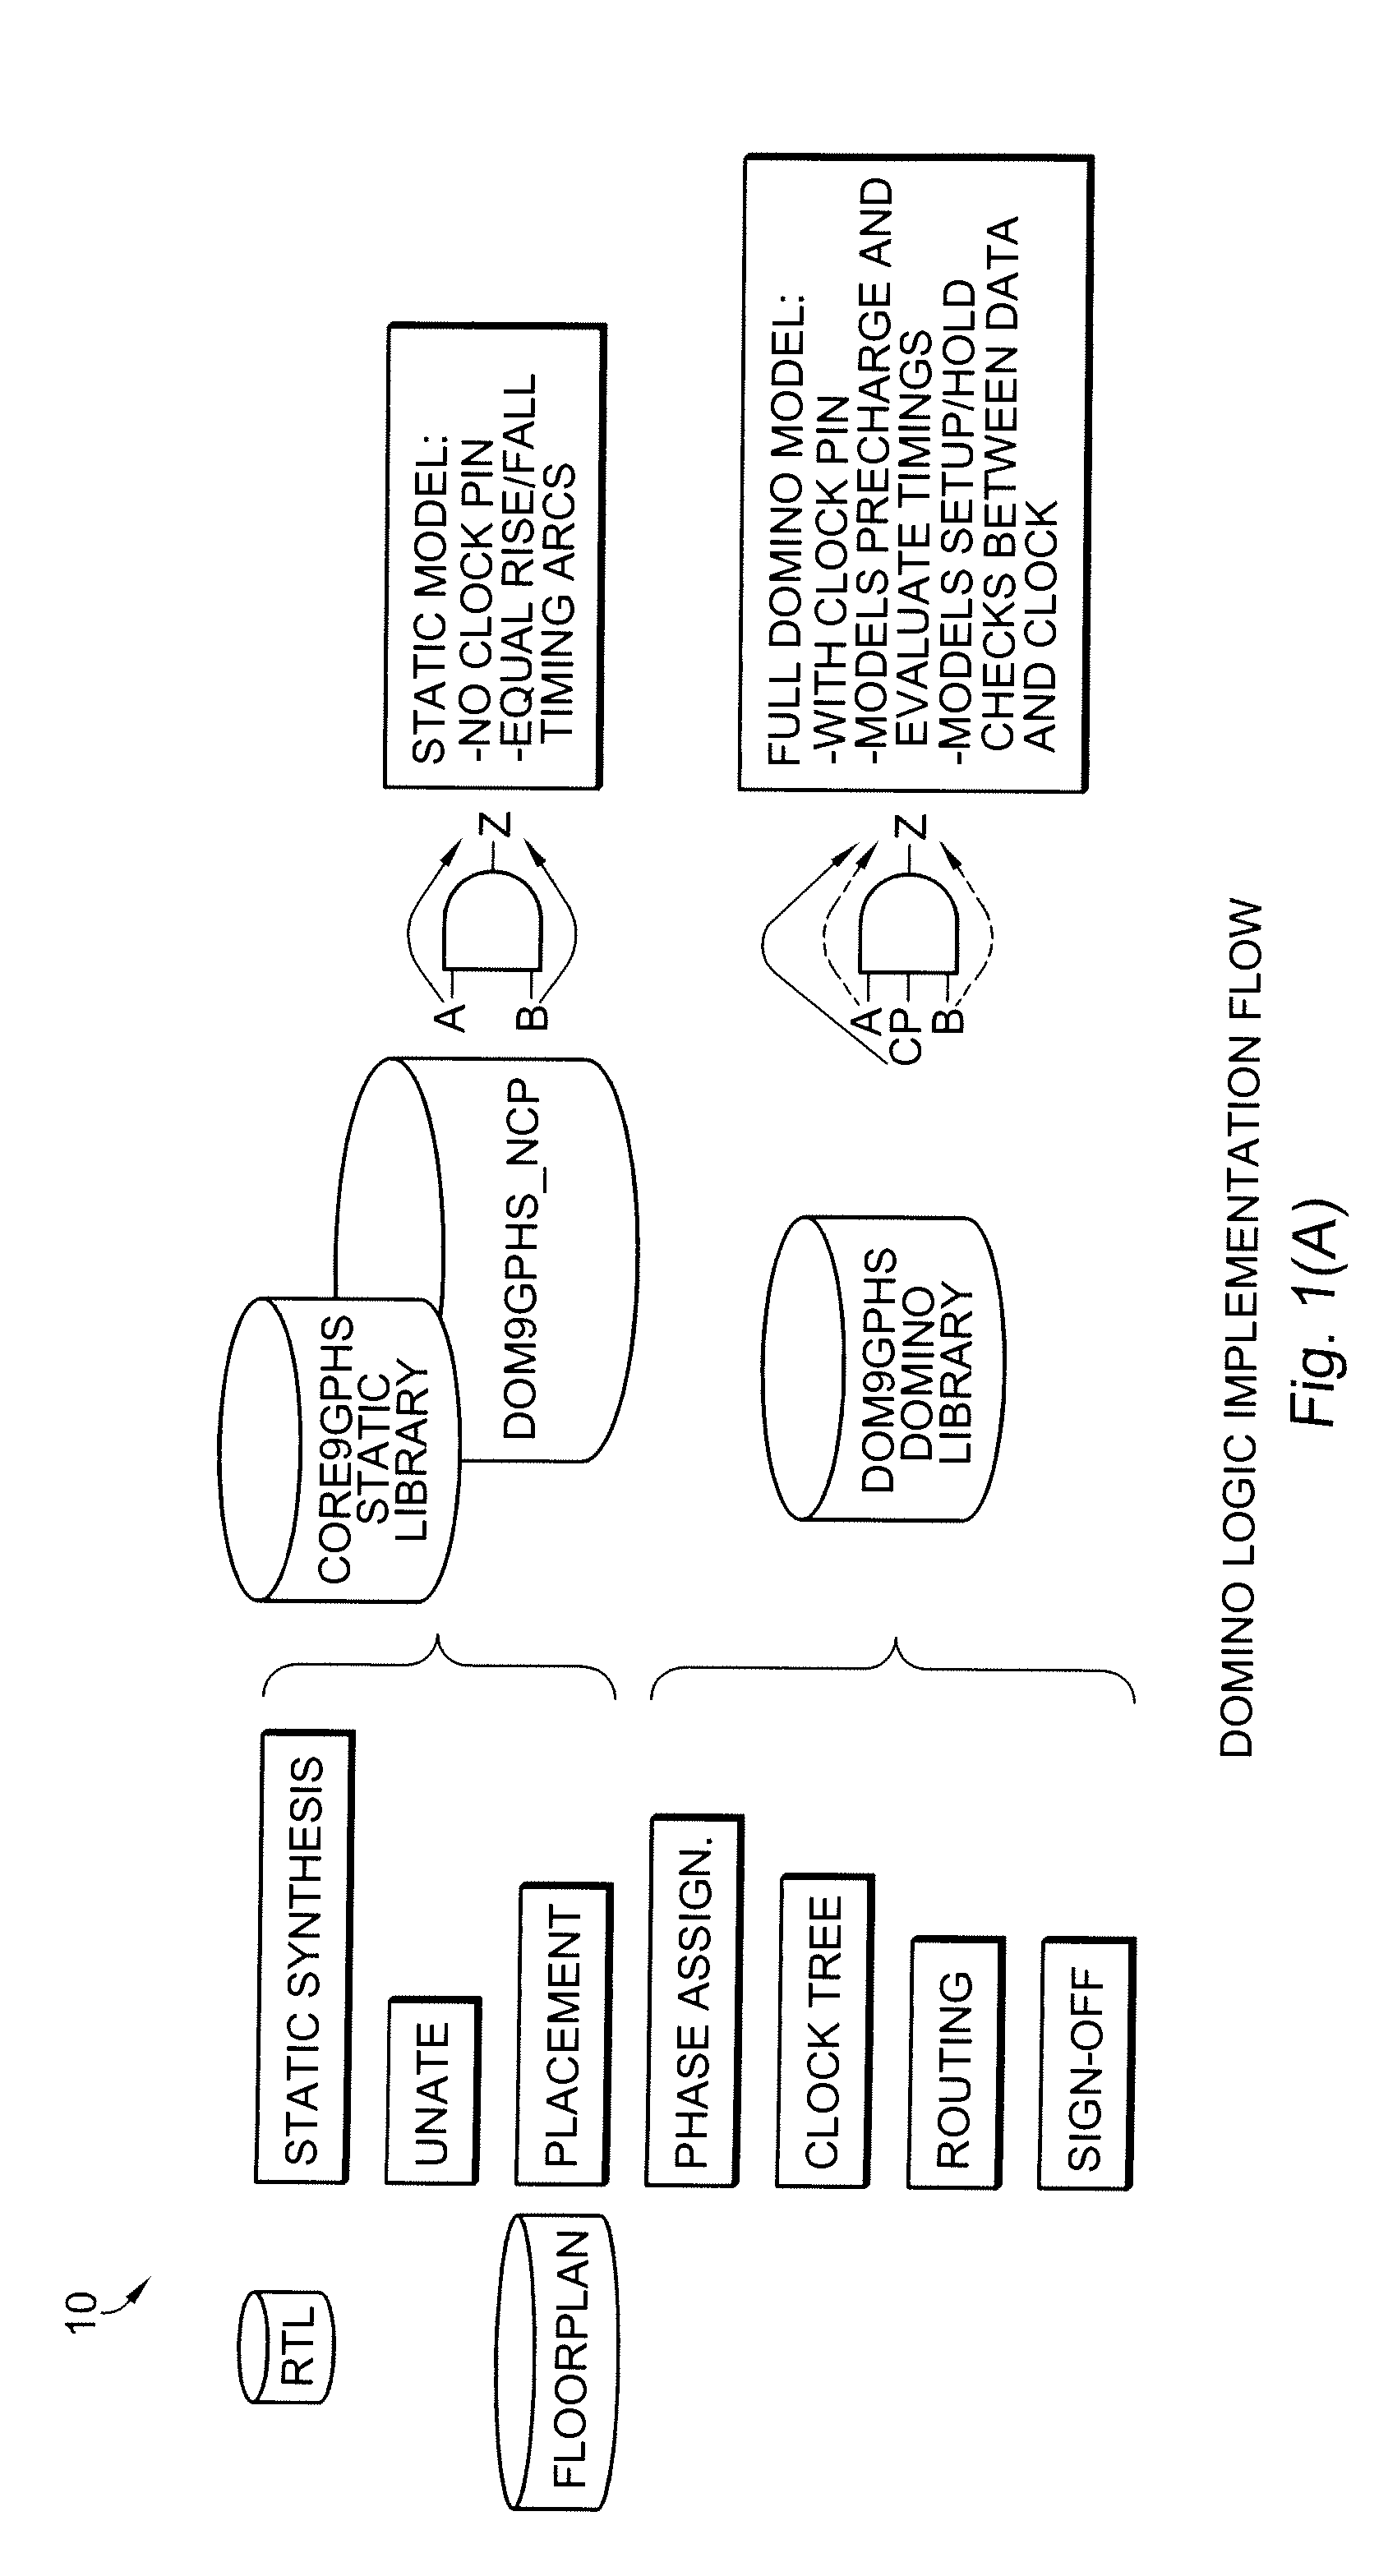 Method to unate a design for improved synthesizable domino logic flow